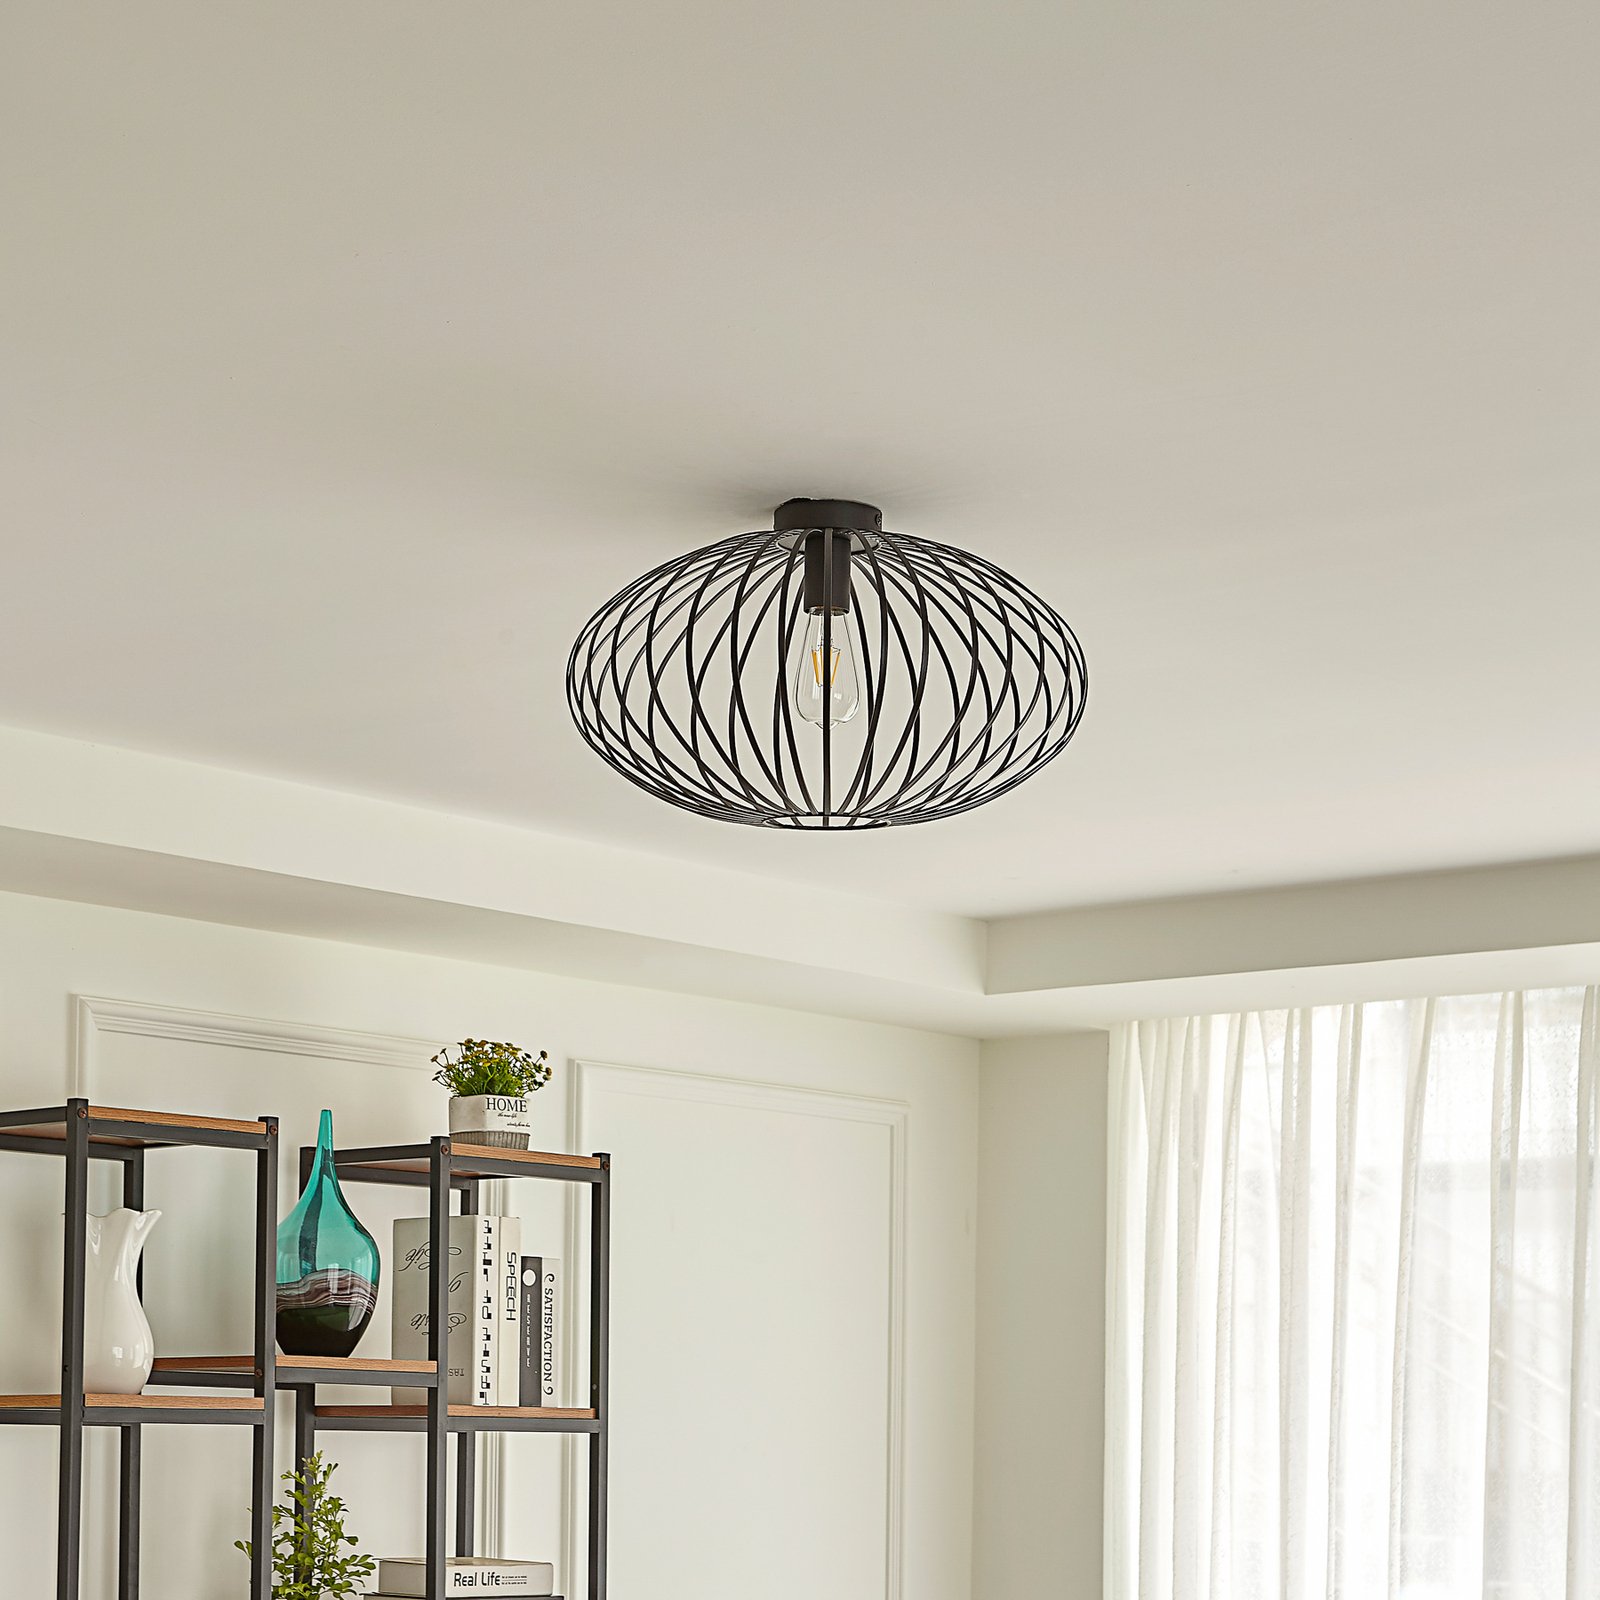 Lindby Maivi ceiling light, black, 50 cm, iron, cage